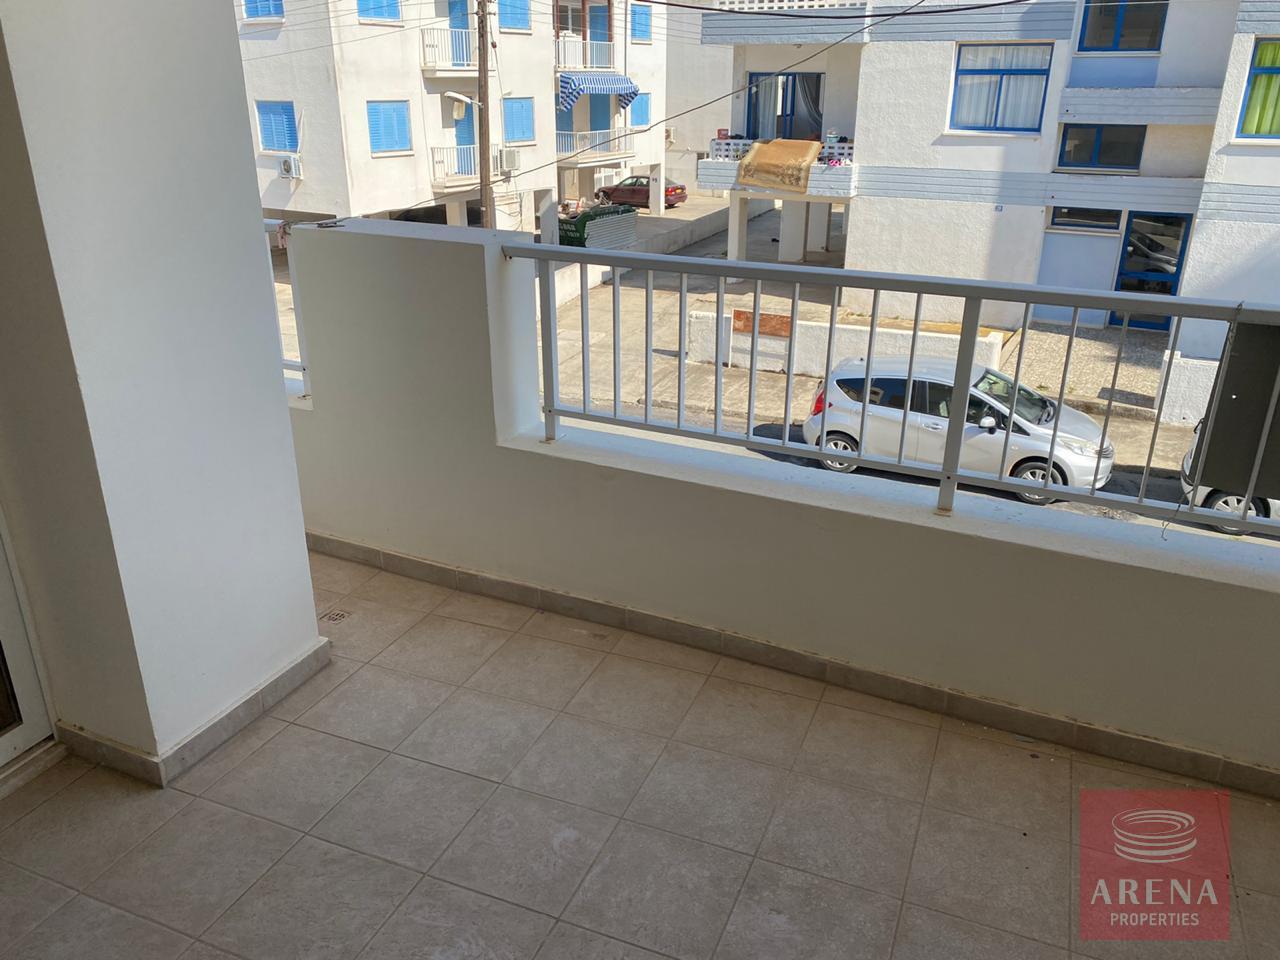 2 bed apartment in Kapparis - balcony